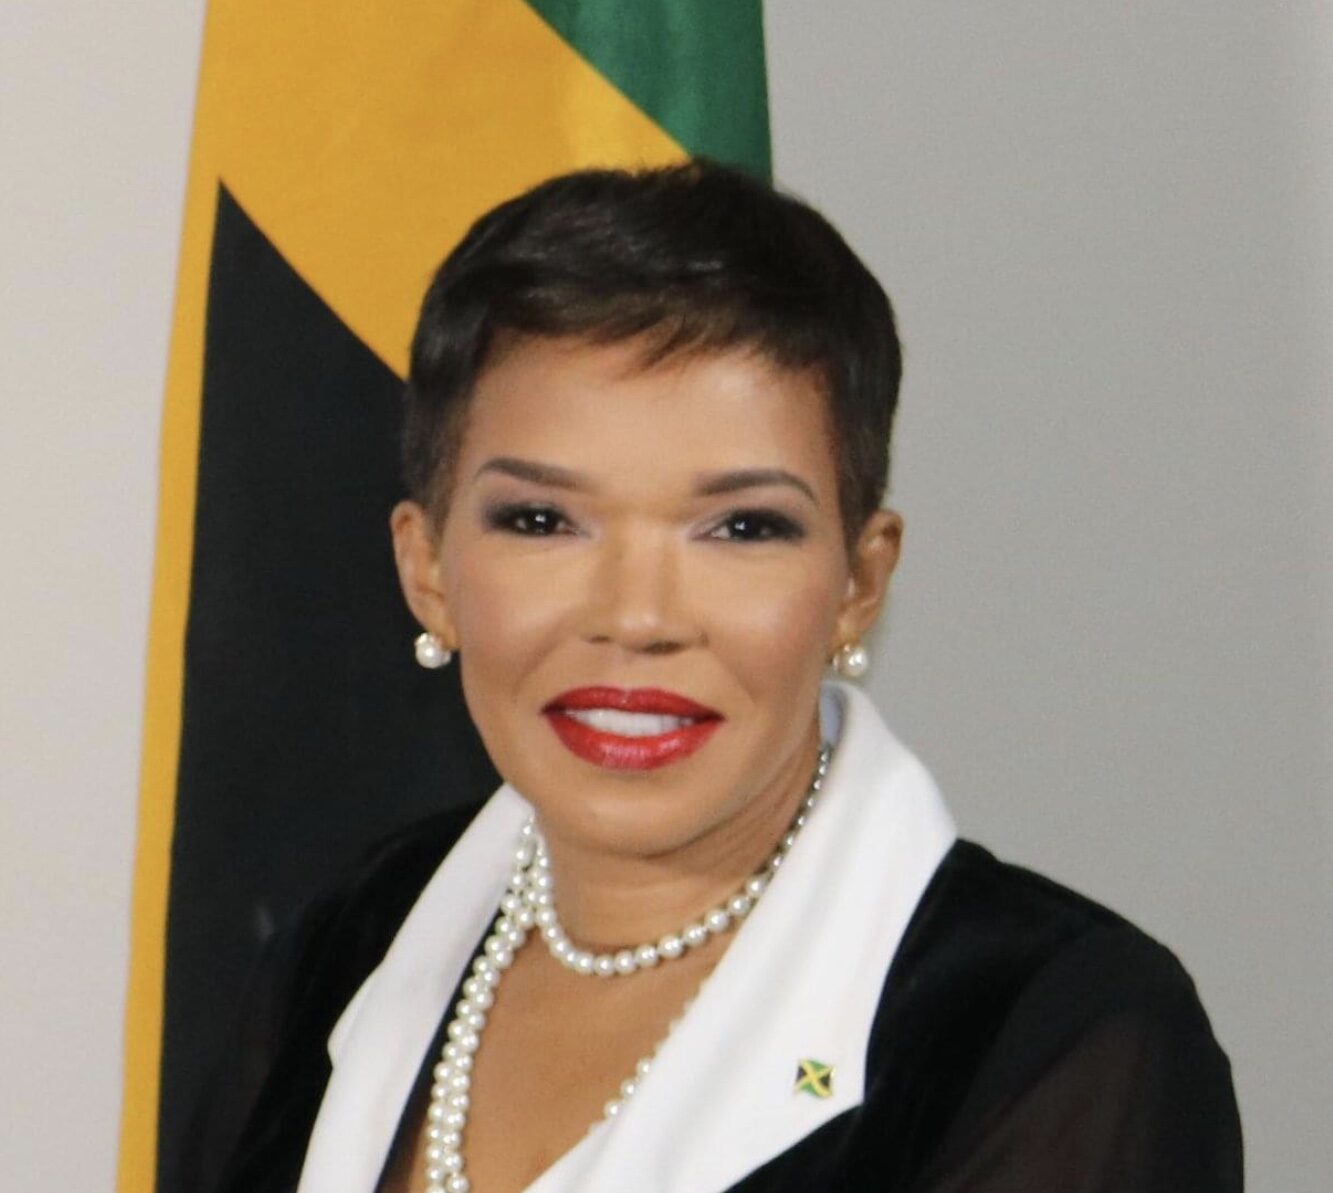 Jamaica rejects same-sex spouse of